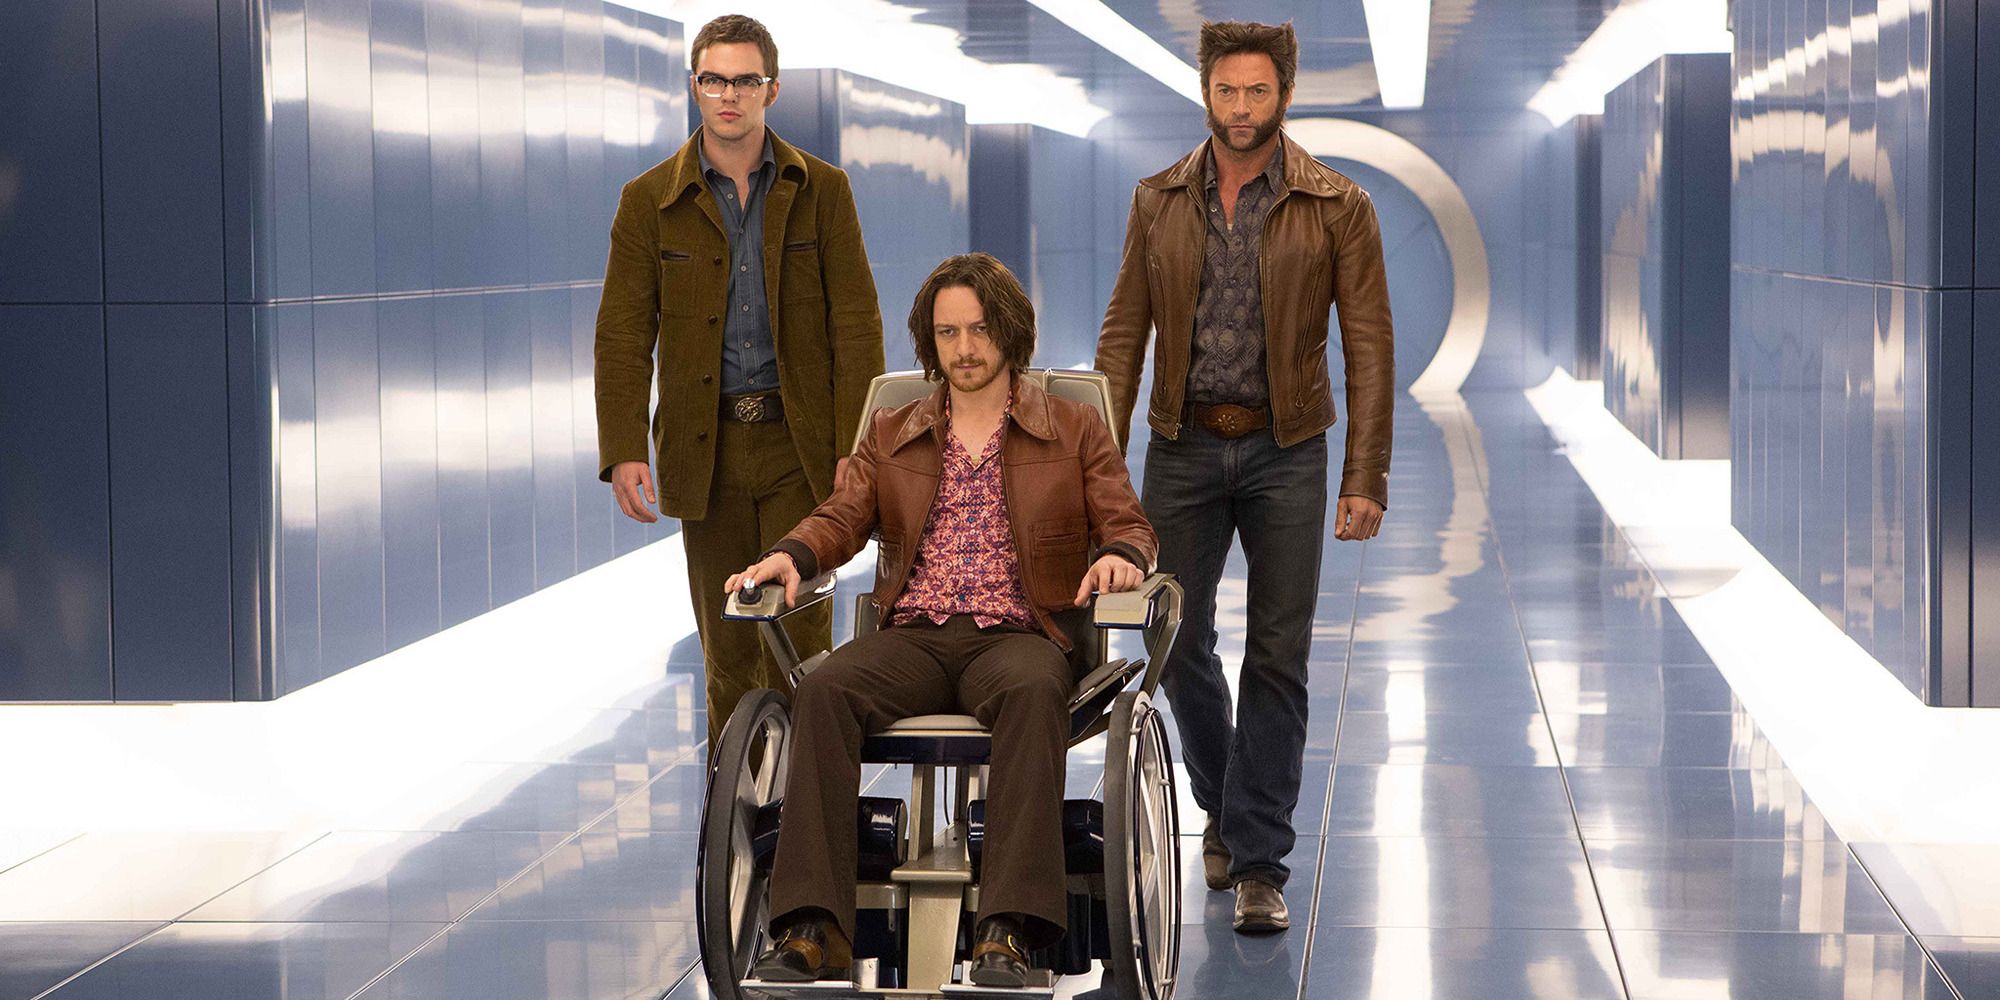 Nicholas Hoult, James McAvoy, and Hugh Jackman in 'X-Men Days of Future Past'